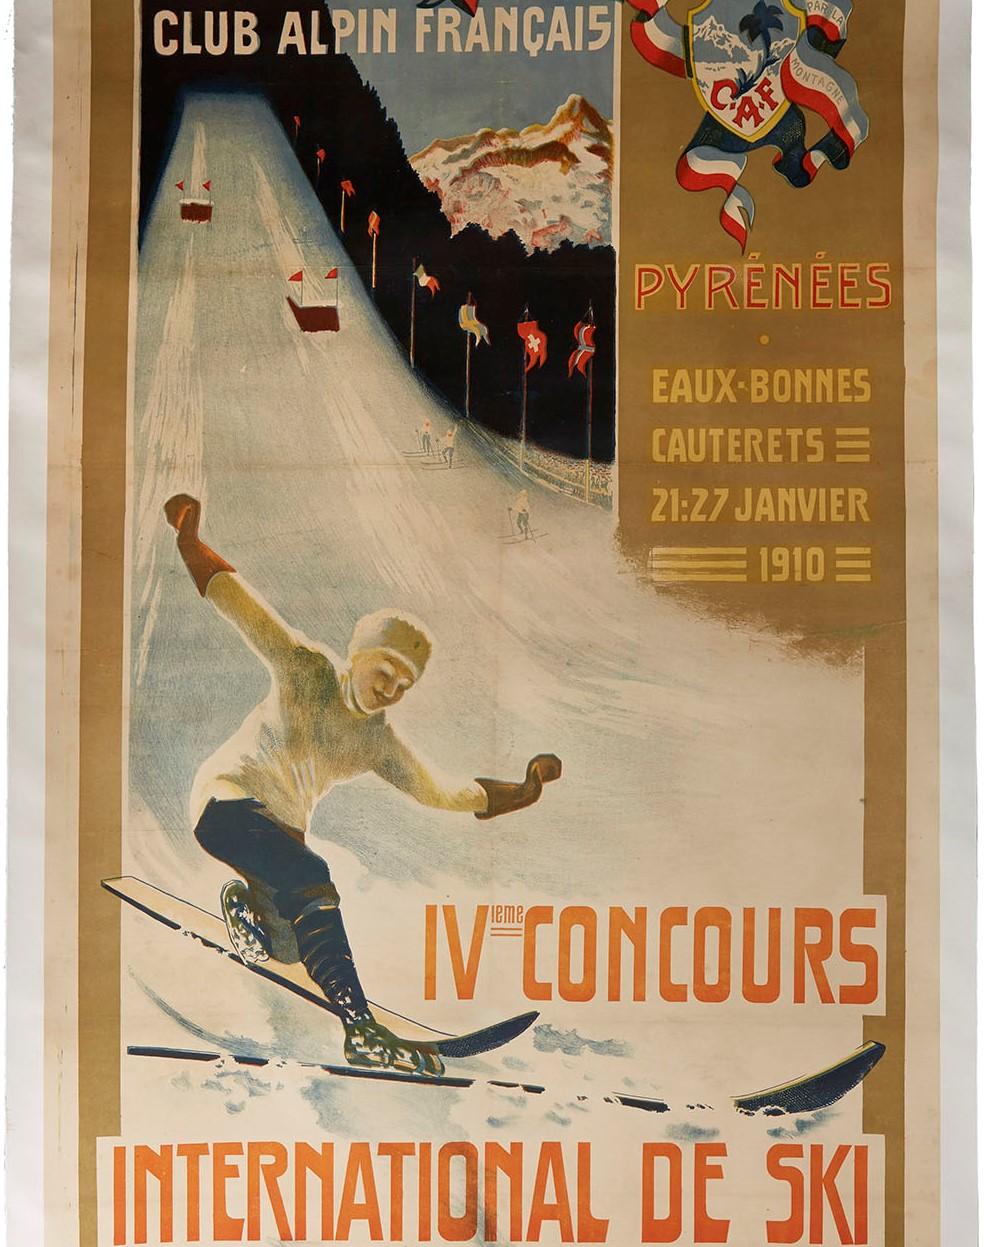 Original antique winter sport poster for the 4th International Ski Competition organised by the French Alpine Club Alpin Francais (CAF; founded 1874) and held from 21-27 January 1910 in the Pyrenees resorts of Eaux Bonnes and Cauterets featuring a